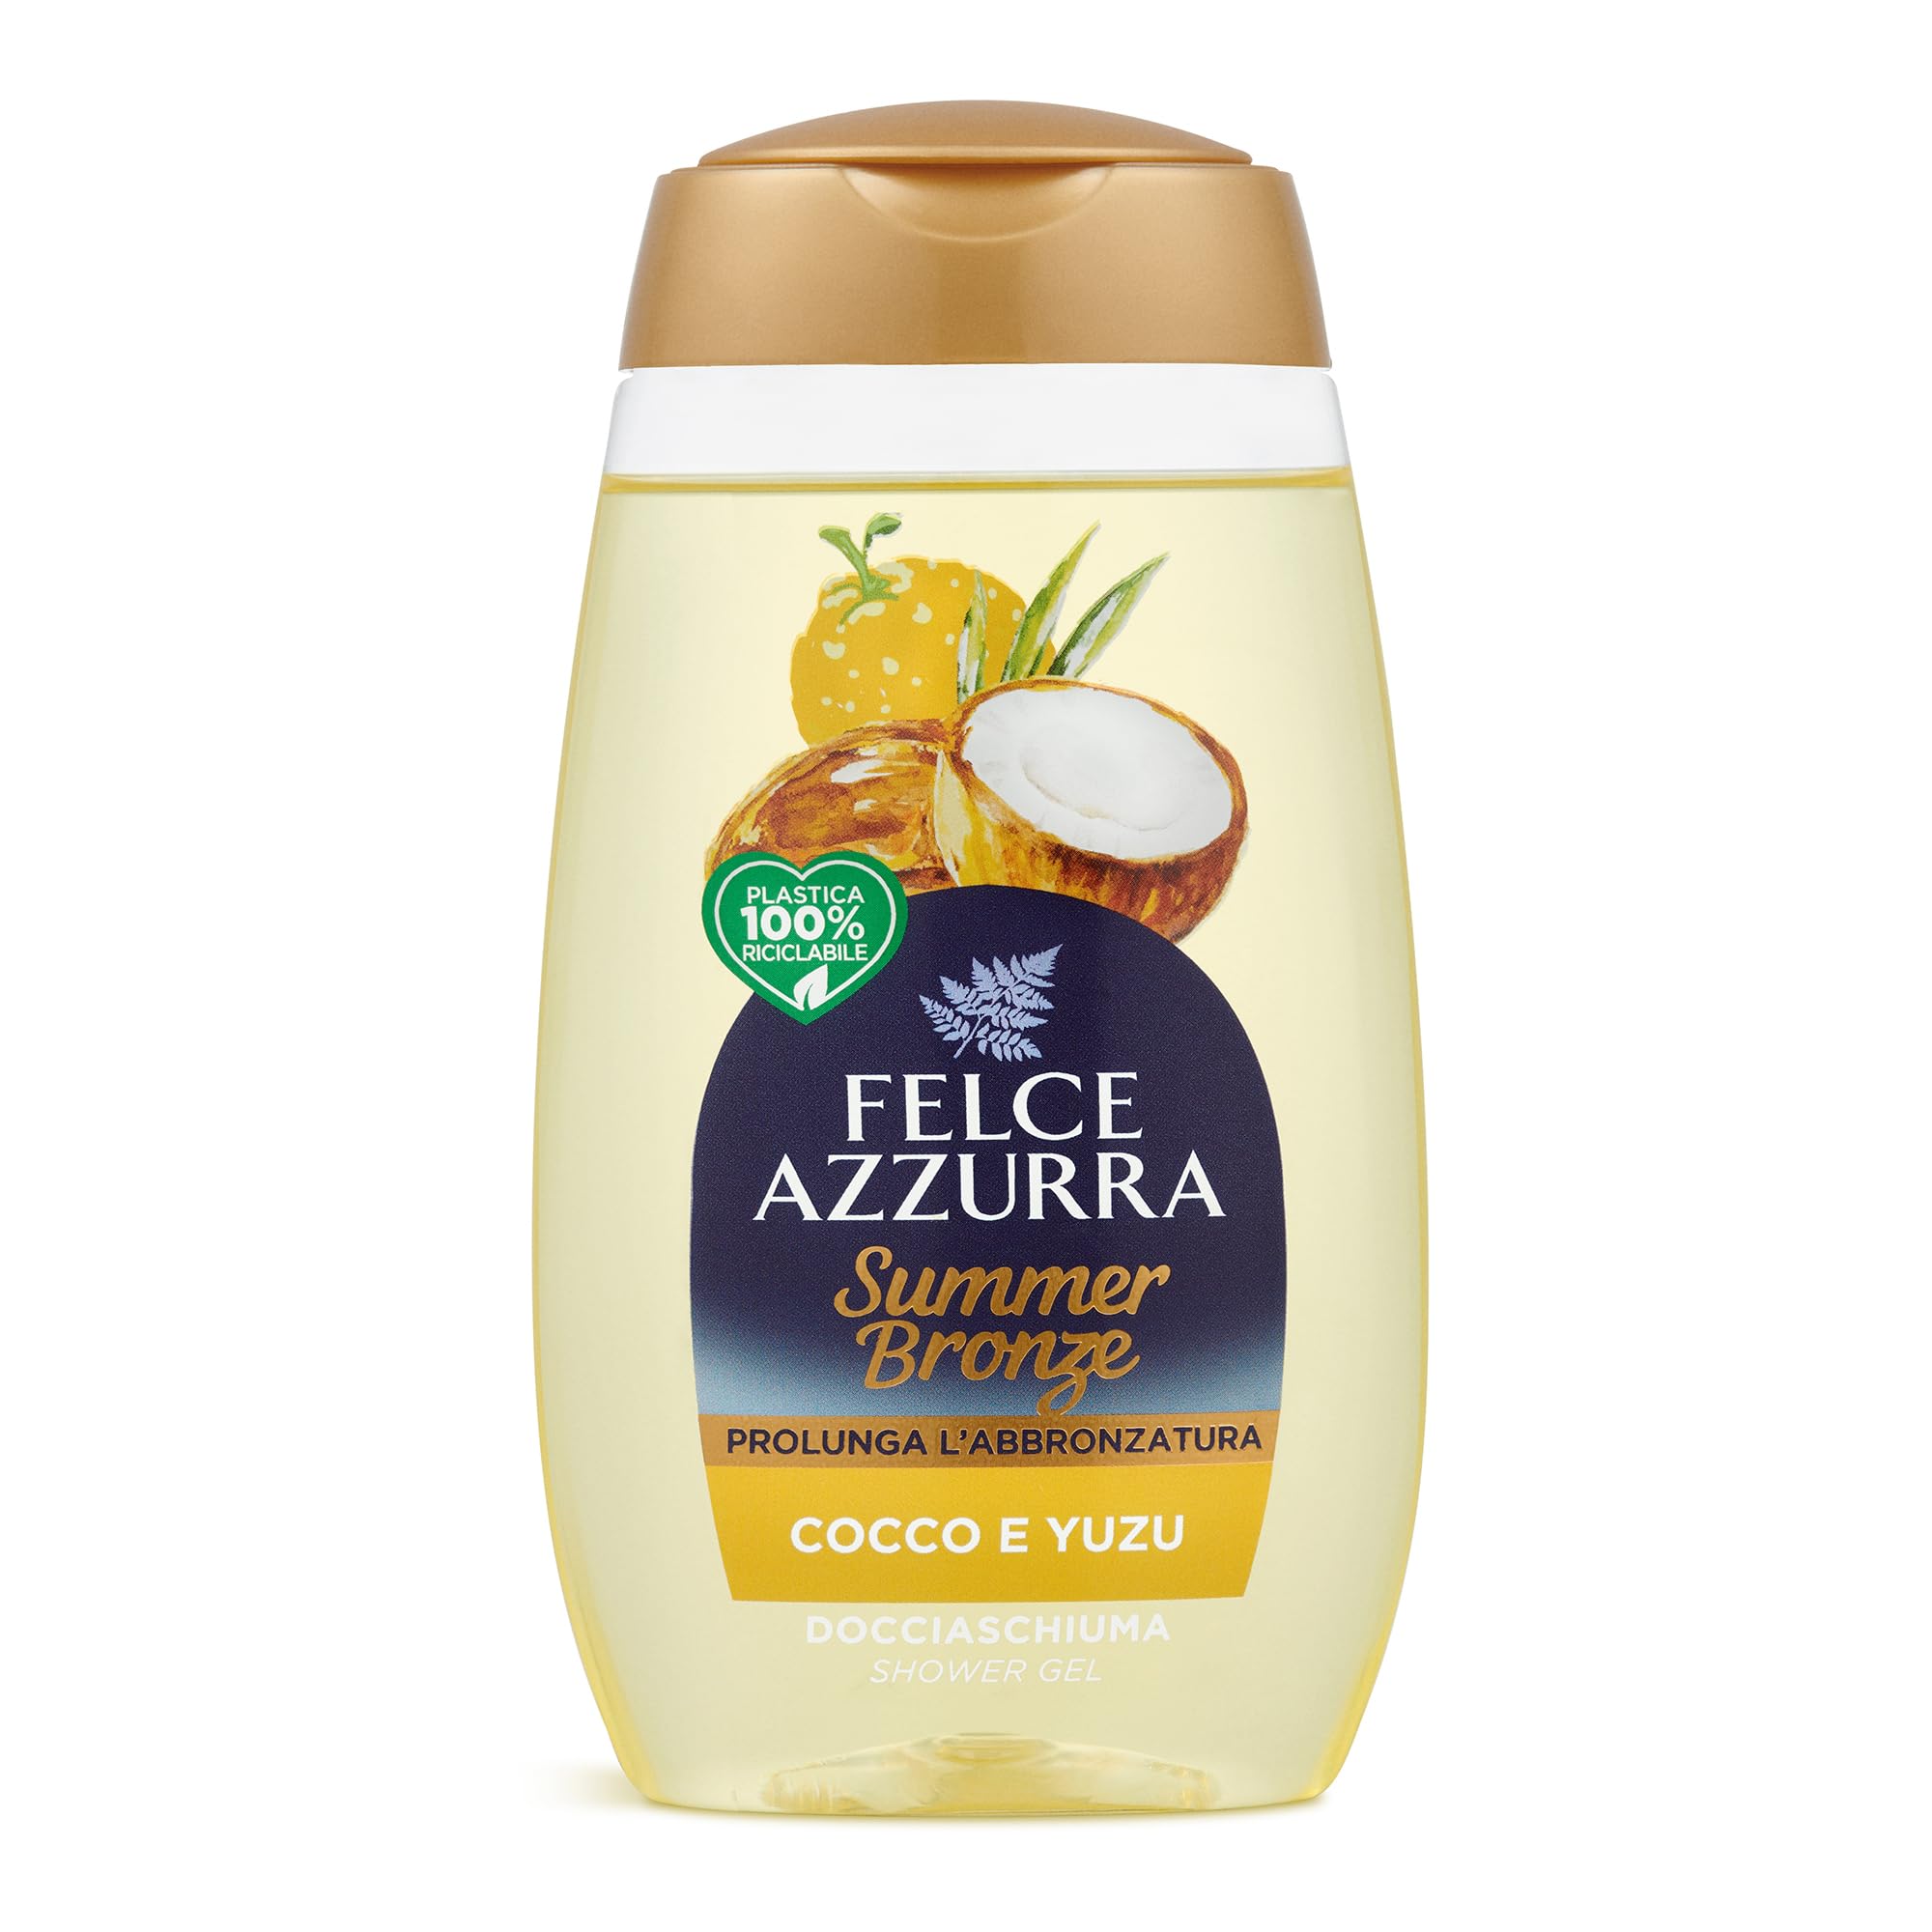 Felce Azzurra Summer Bronze - Tan Extending Body Wash - Emollient Active Ingredients Nourish and Moisturize Your Skin - Pamper Yourself with Scented Shower Gel - Cocco and Yuzu - 8.45 oz